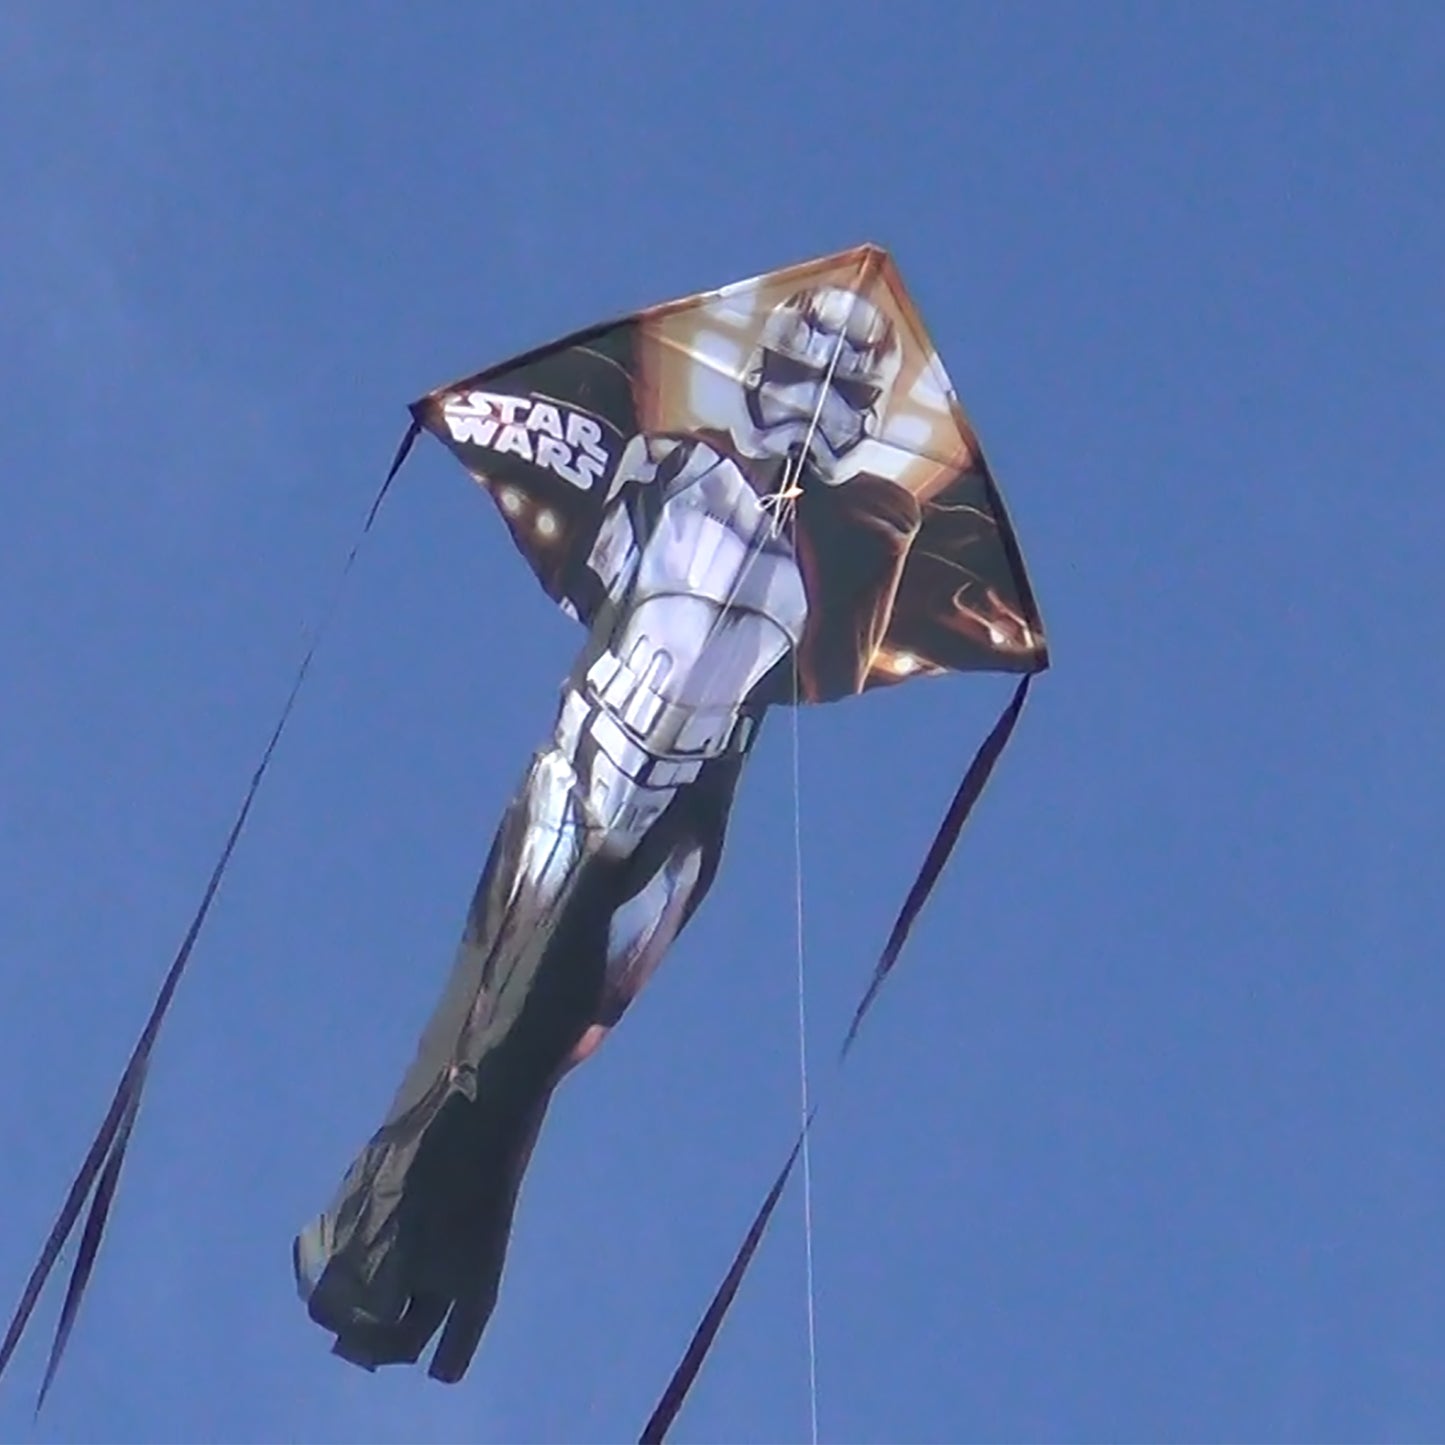 WindNSun Breezy Fliers 57 Star Wars Phasma Nylon Kite 57 Inches Tall photo of product in use